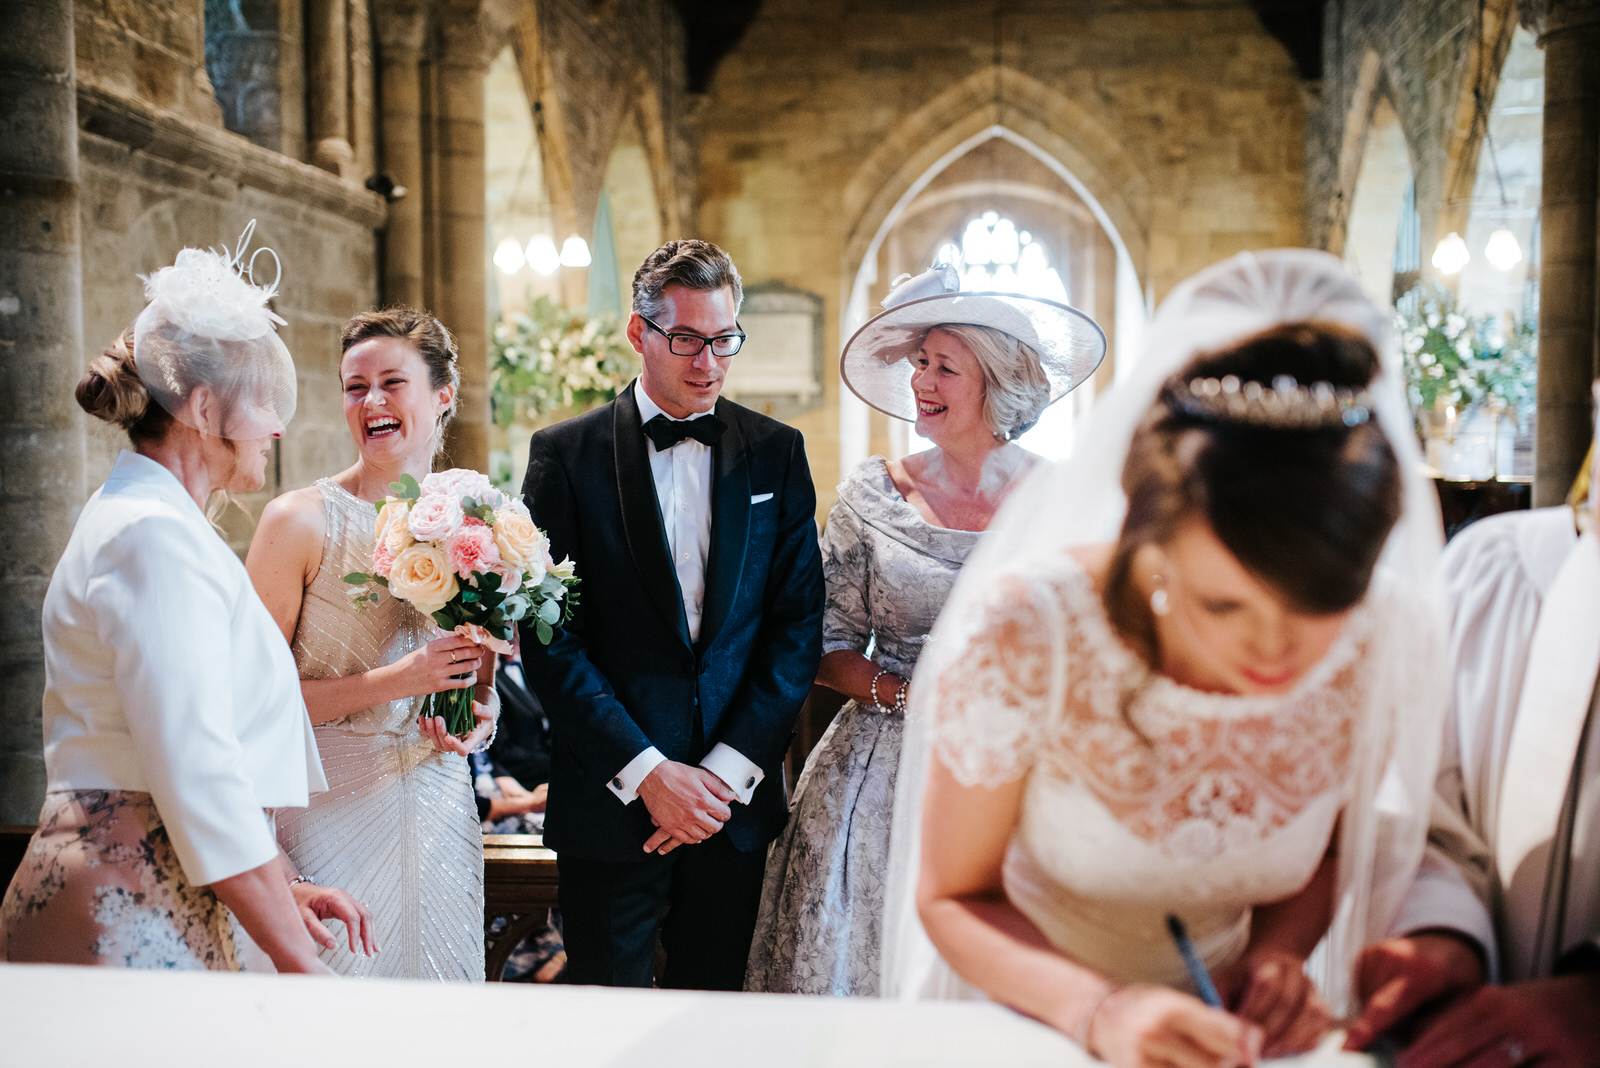 Bride signs the register while Groom and relatives laugh from be